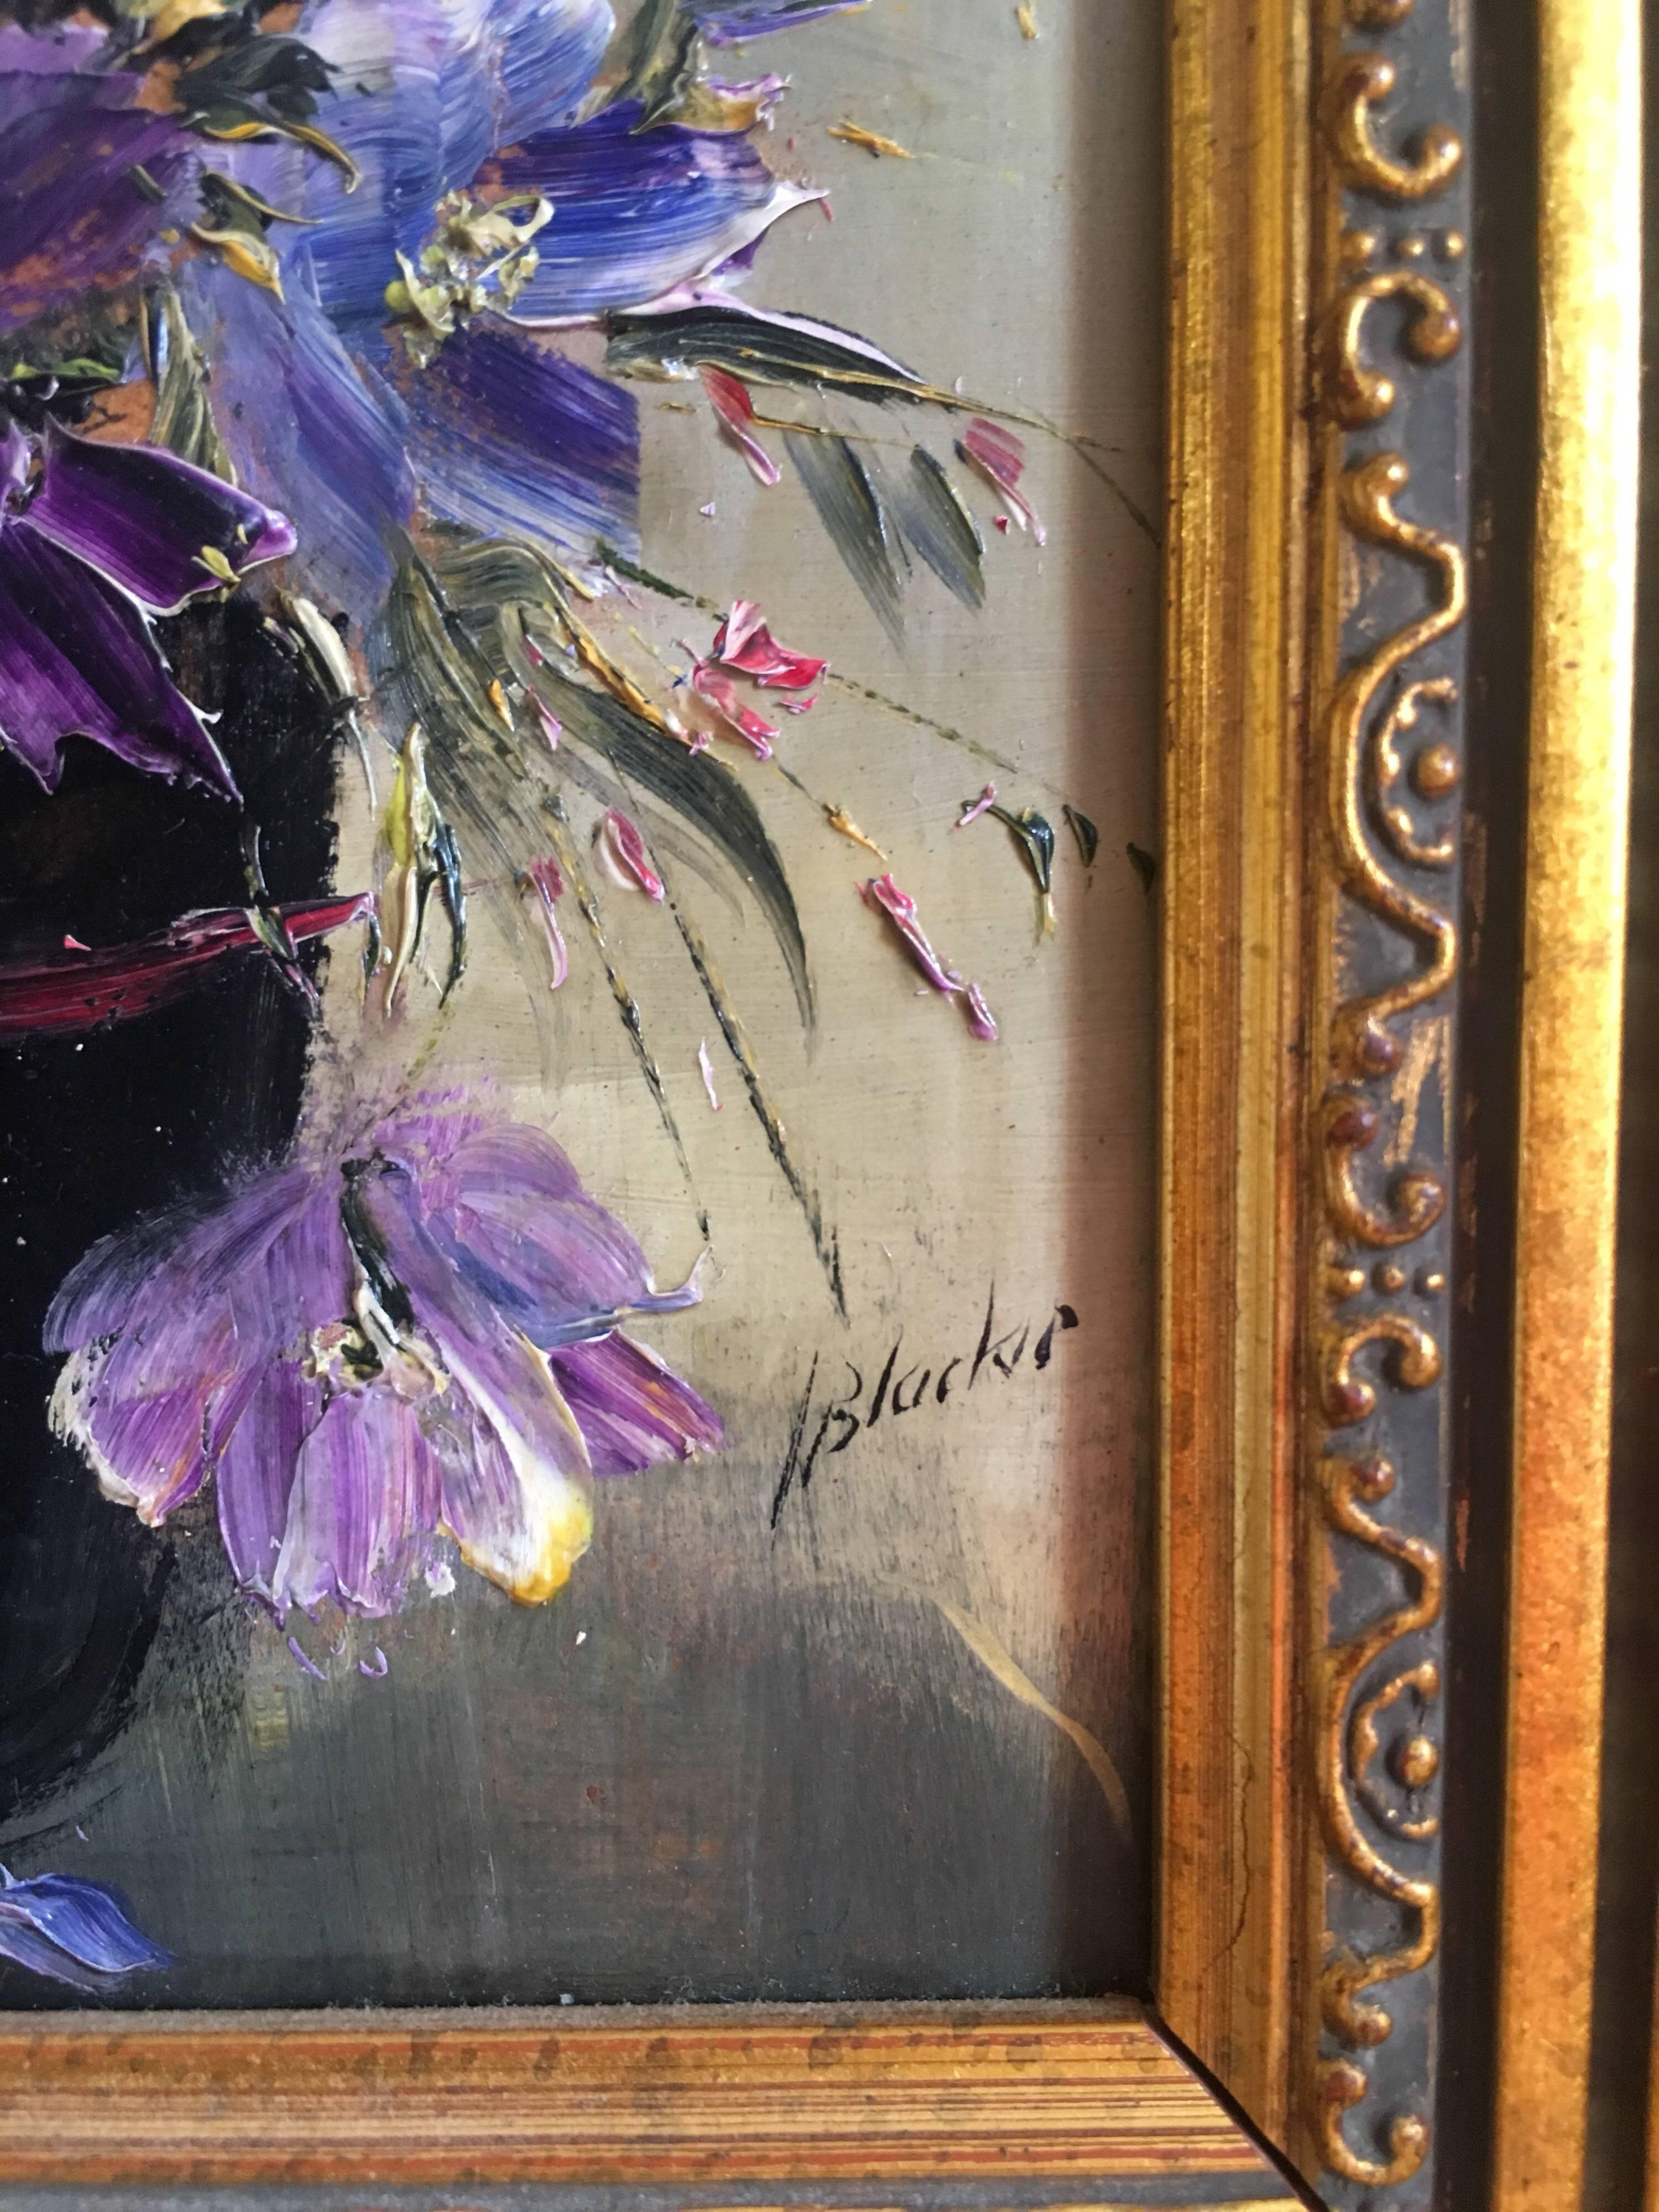 Purple Floral Arrangement, Oil Painting, Signed - Gray Still-Life Painting by Lillias Blackie